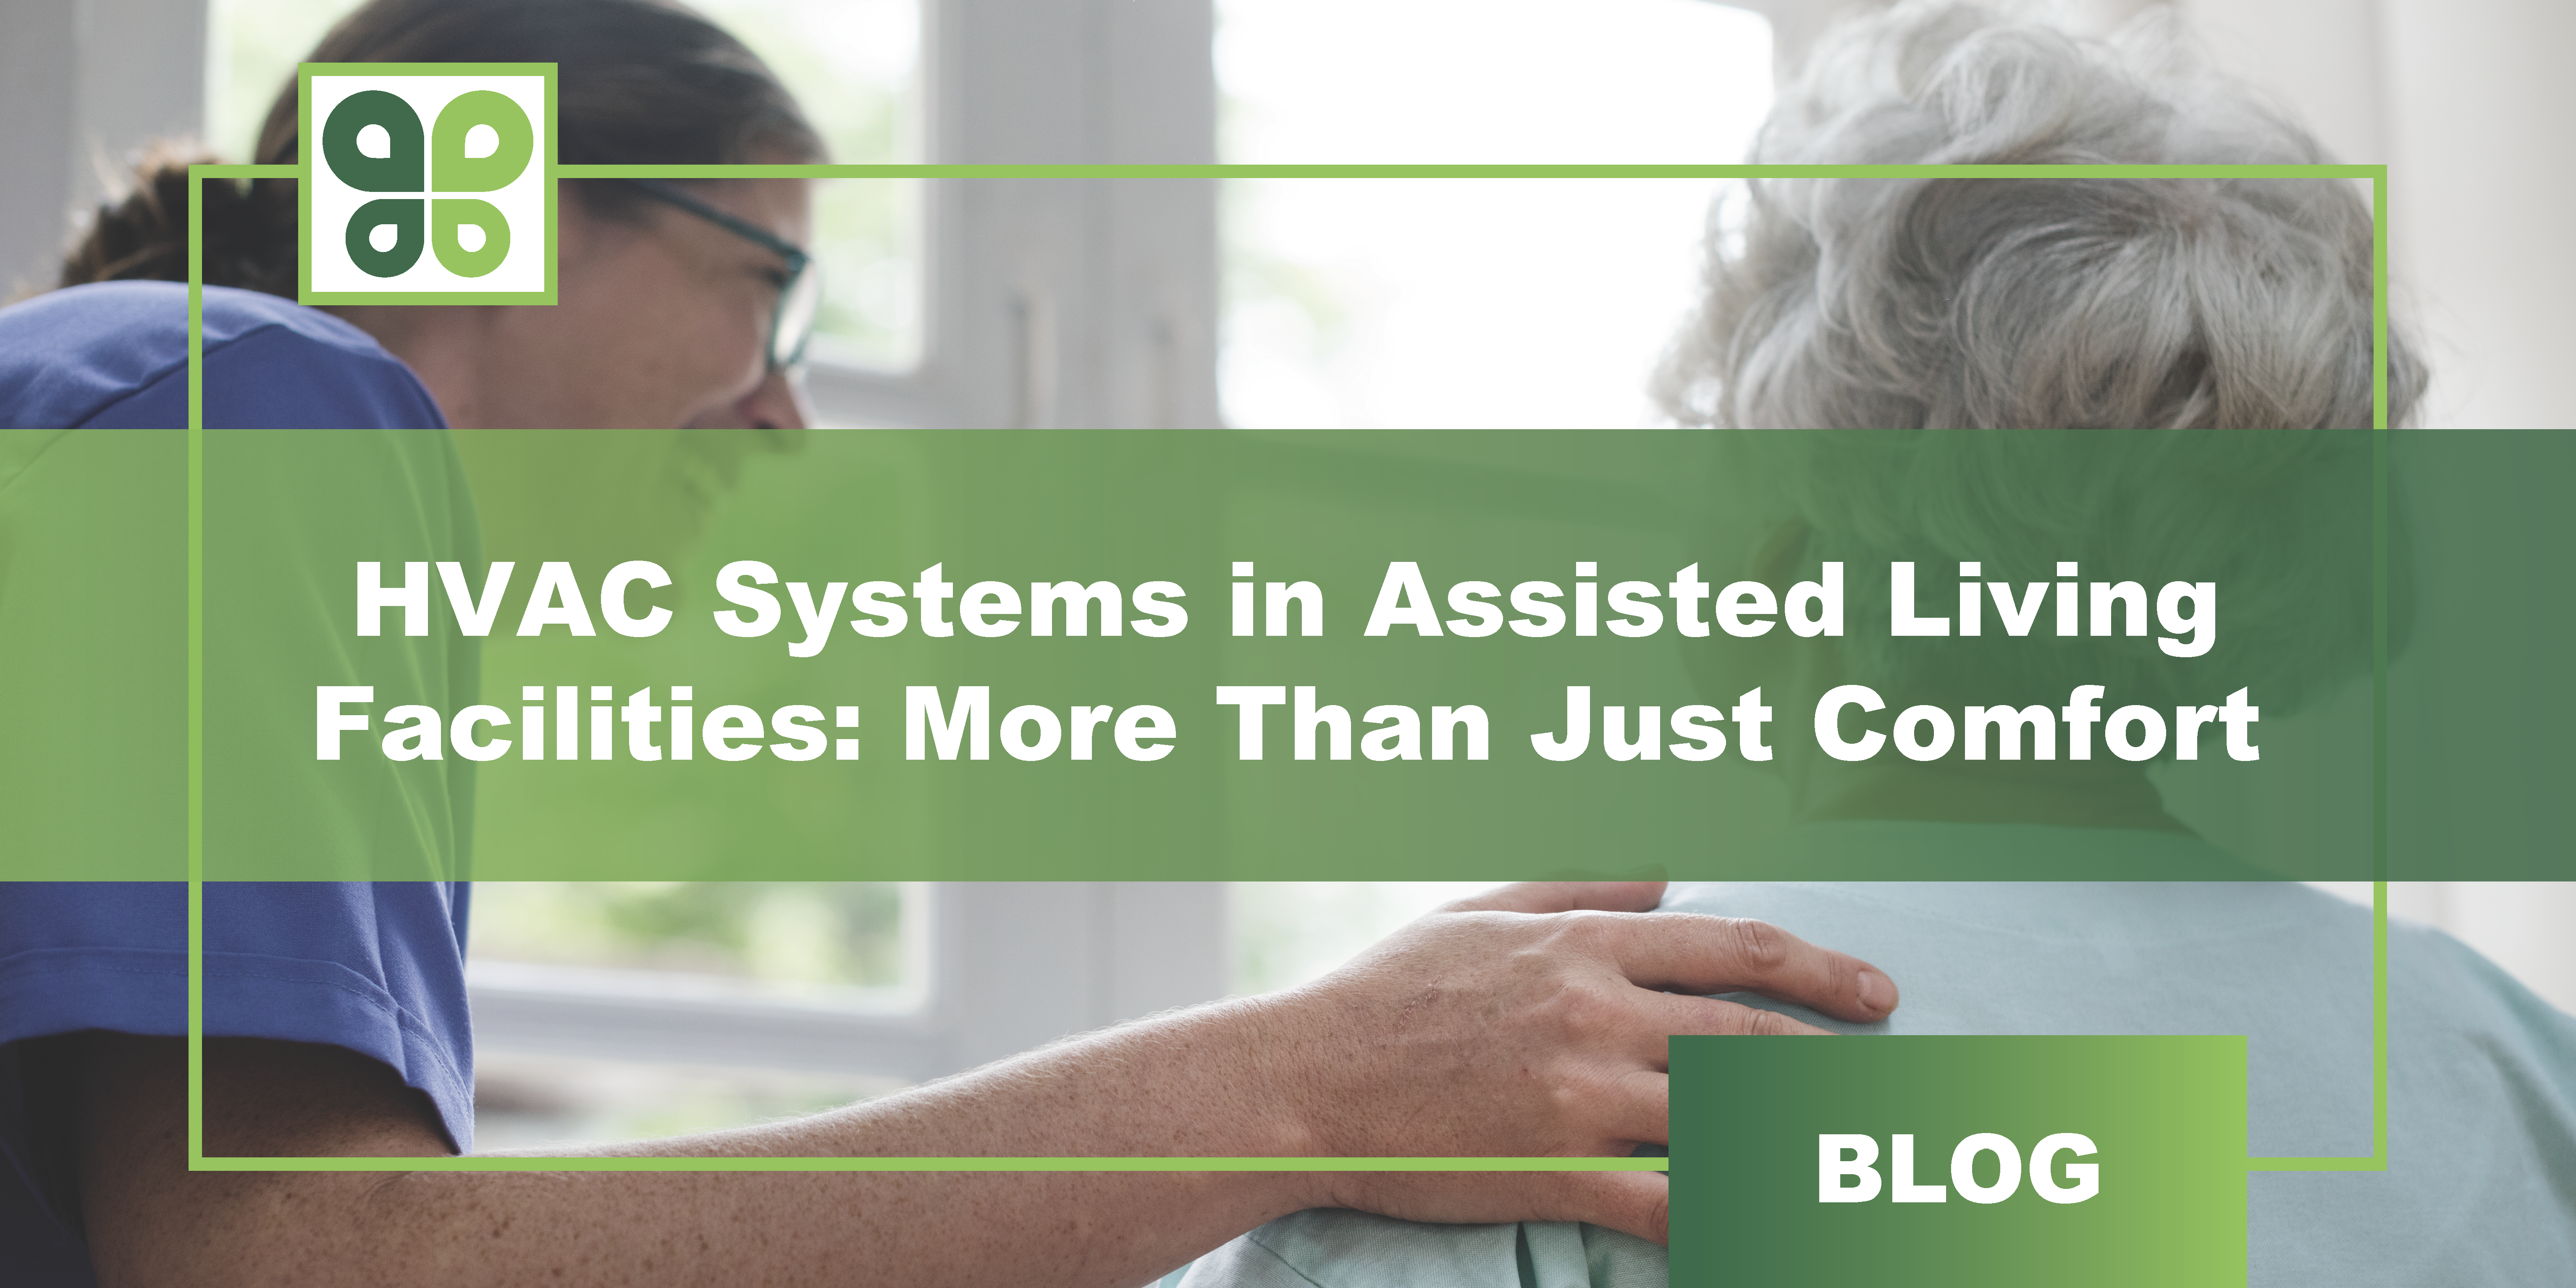 Assisted Living Facilities and HVAC Systems: More Than Just Comfort